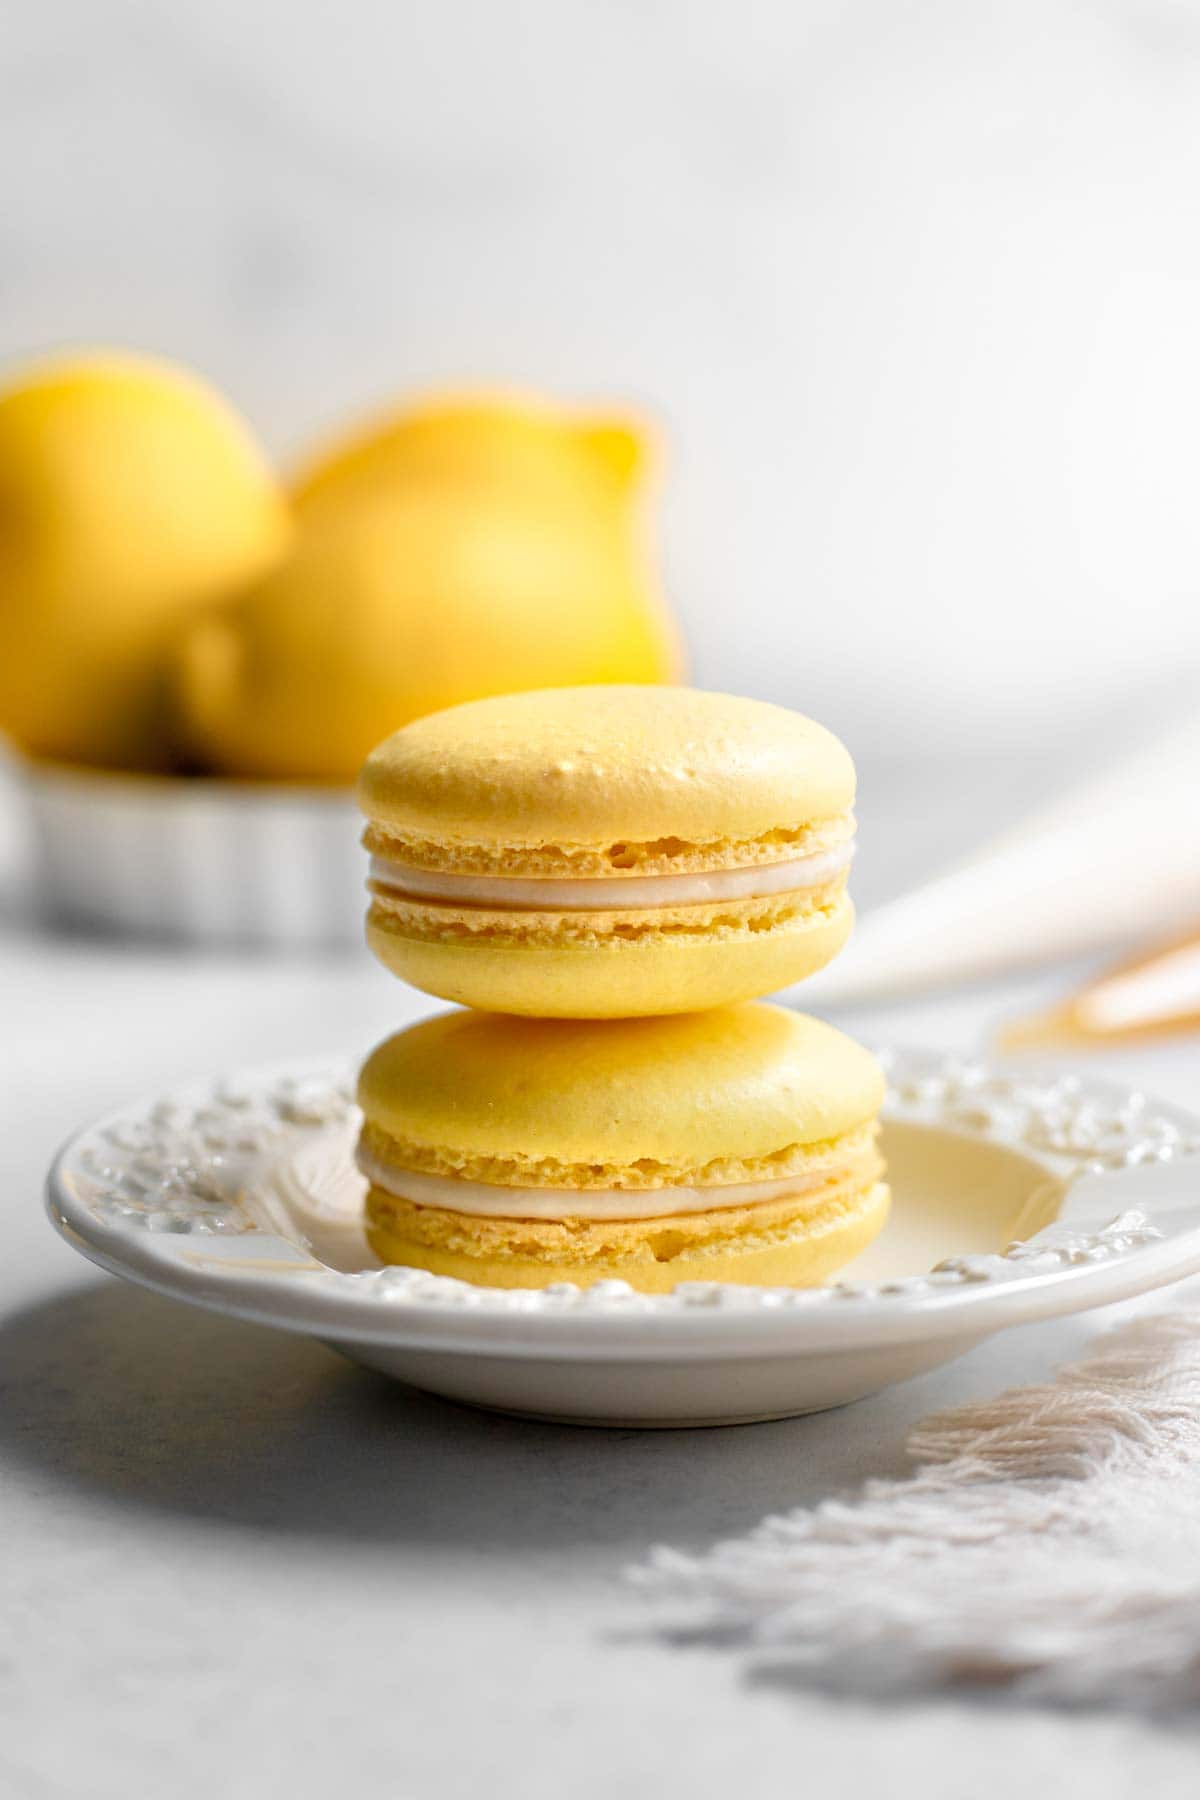 Two lemon macarons stacked on a plate in front of three lemons and piping bags